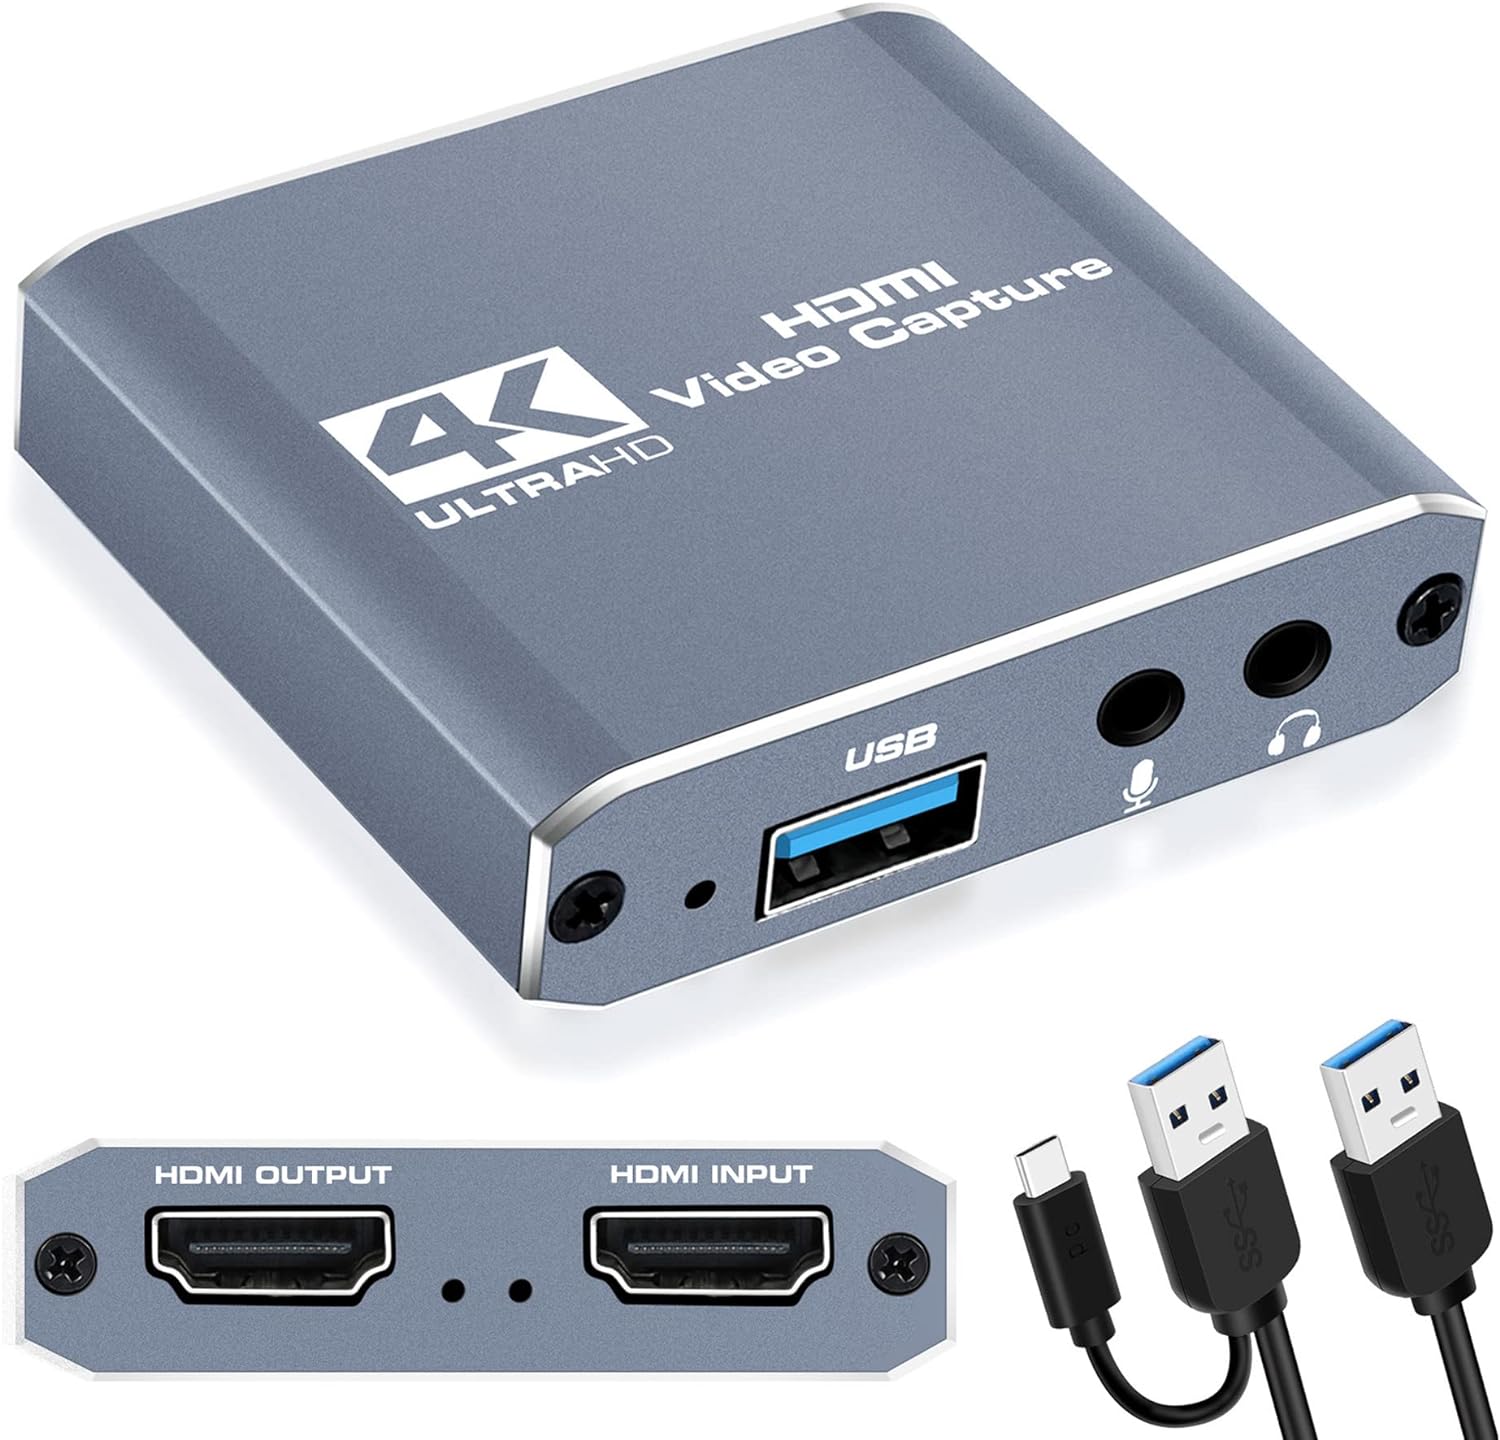 8 Best Hdmi Usb Capture Card for 2023